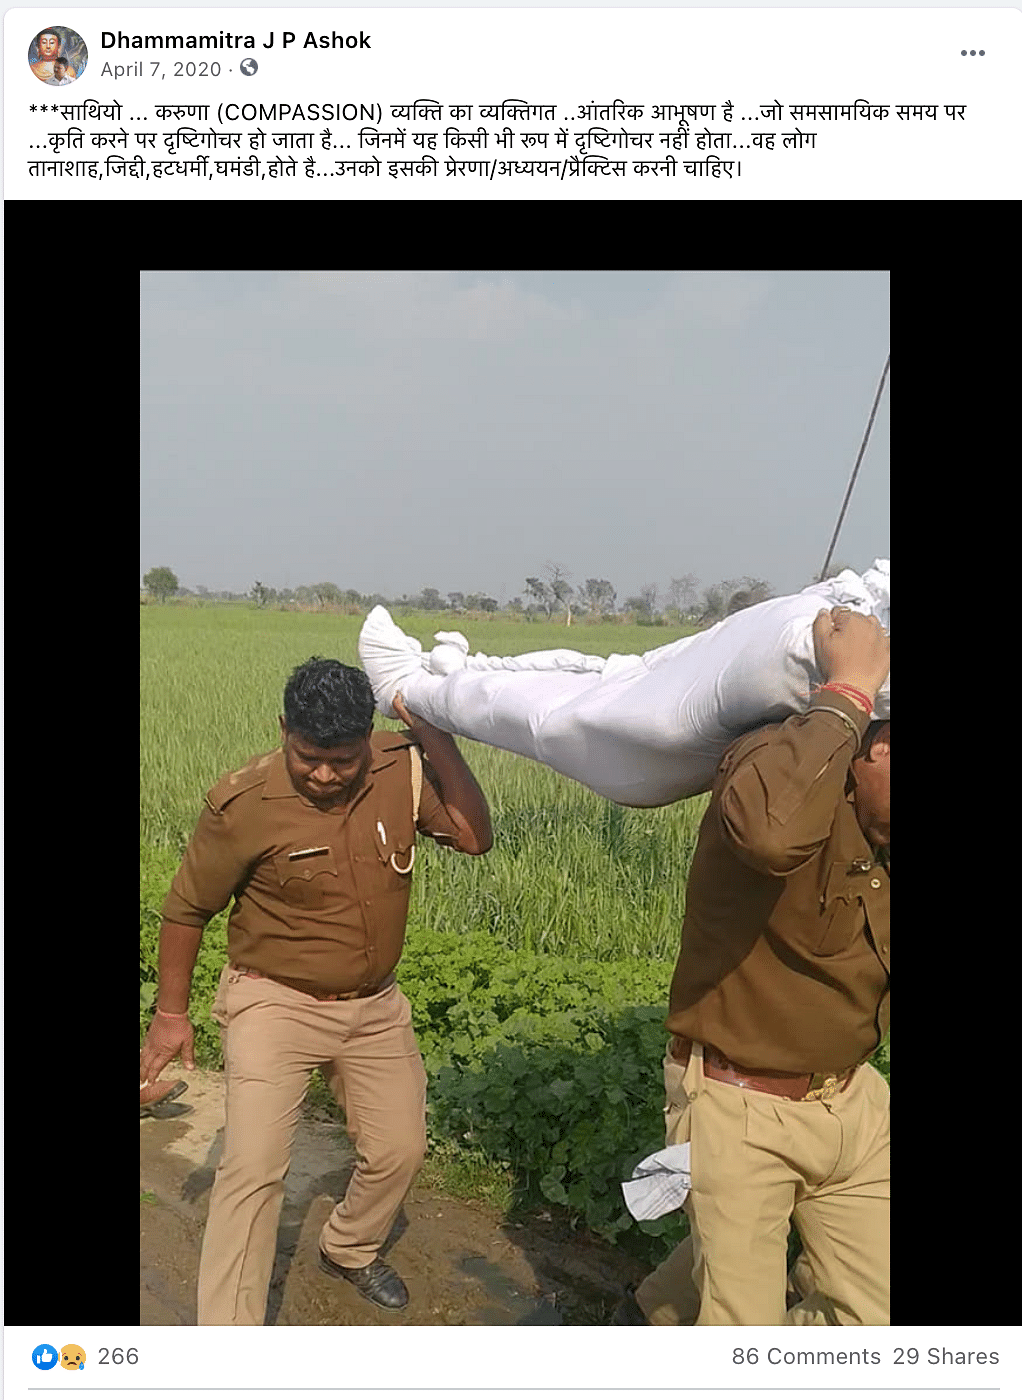 Prashant Singh, the cop seen in the image, said that they carried the body only till the ambulance.